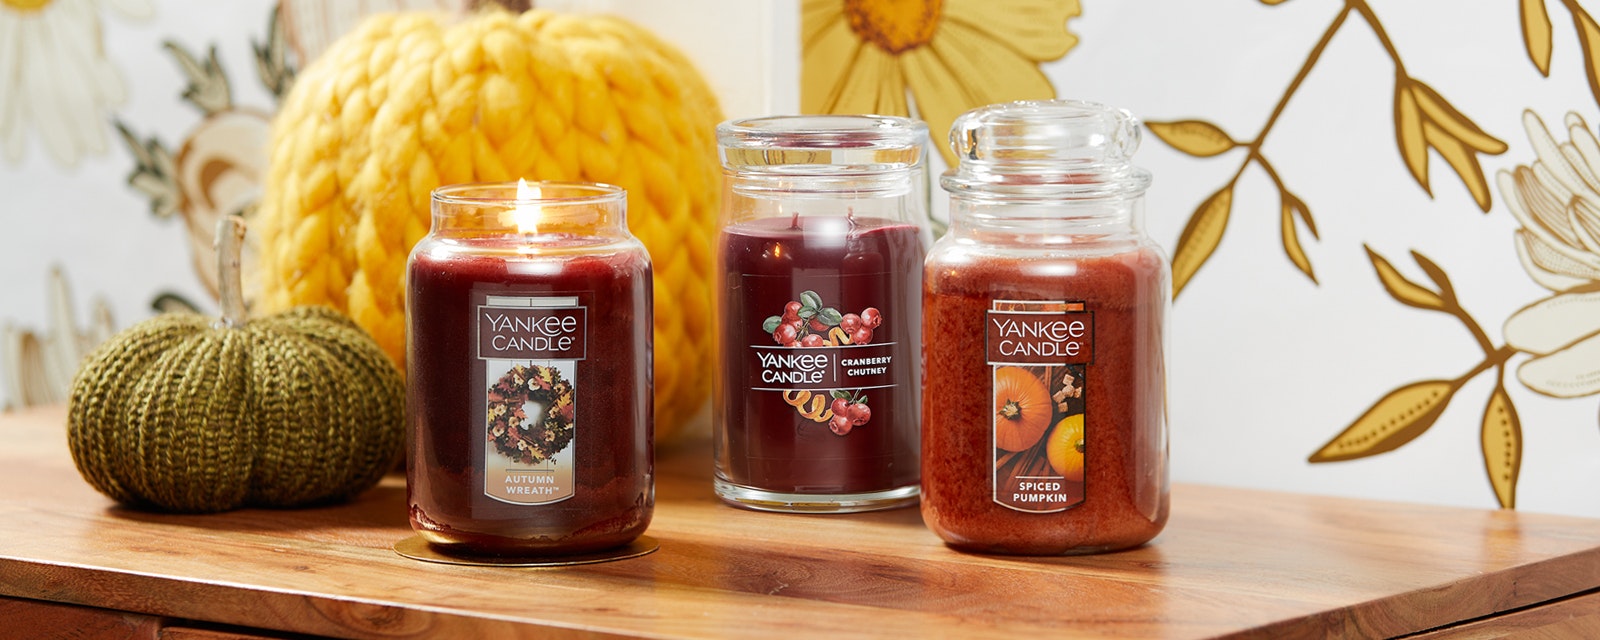 three orange and red large jar candles on table with knit pumpkins and flower artwork